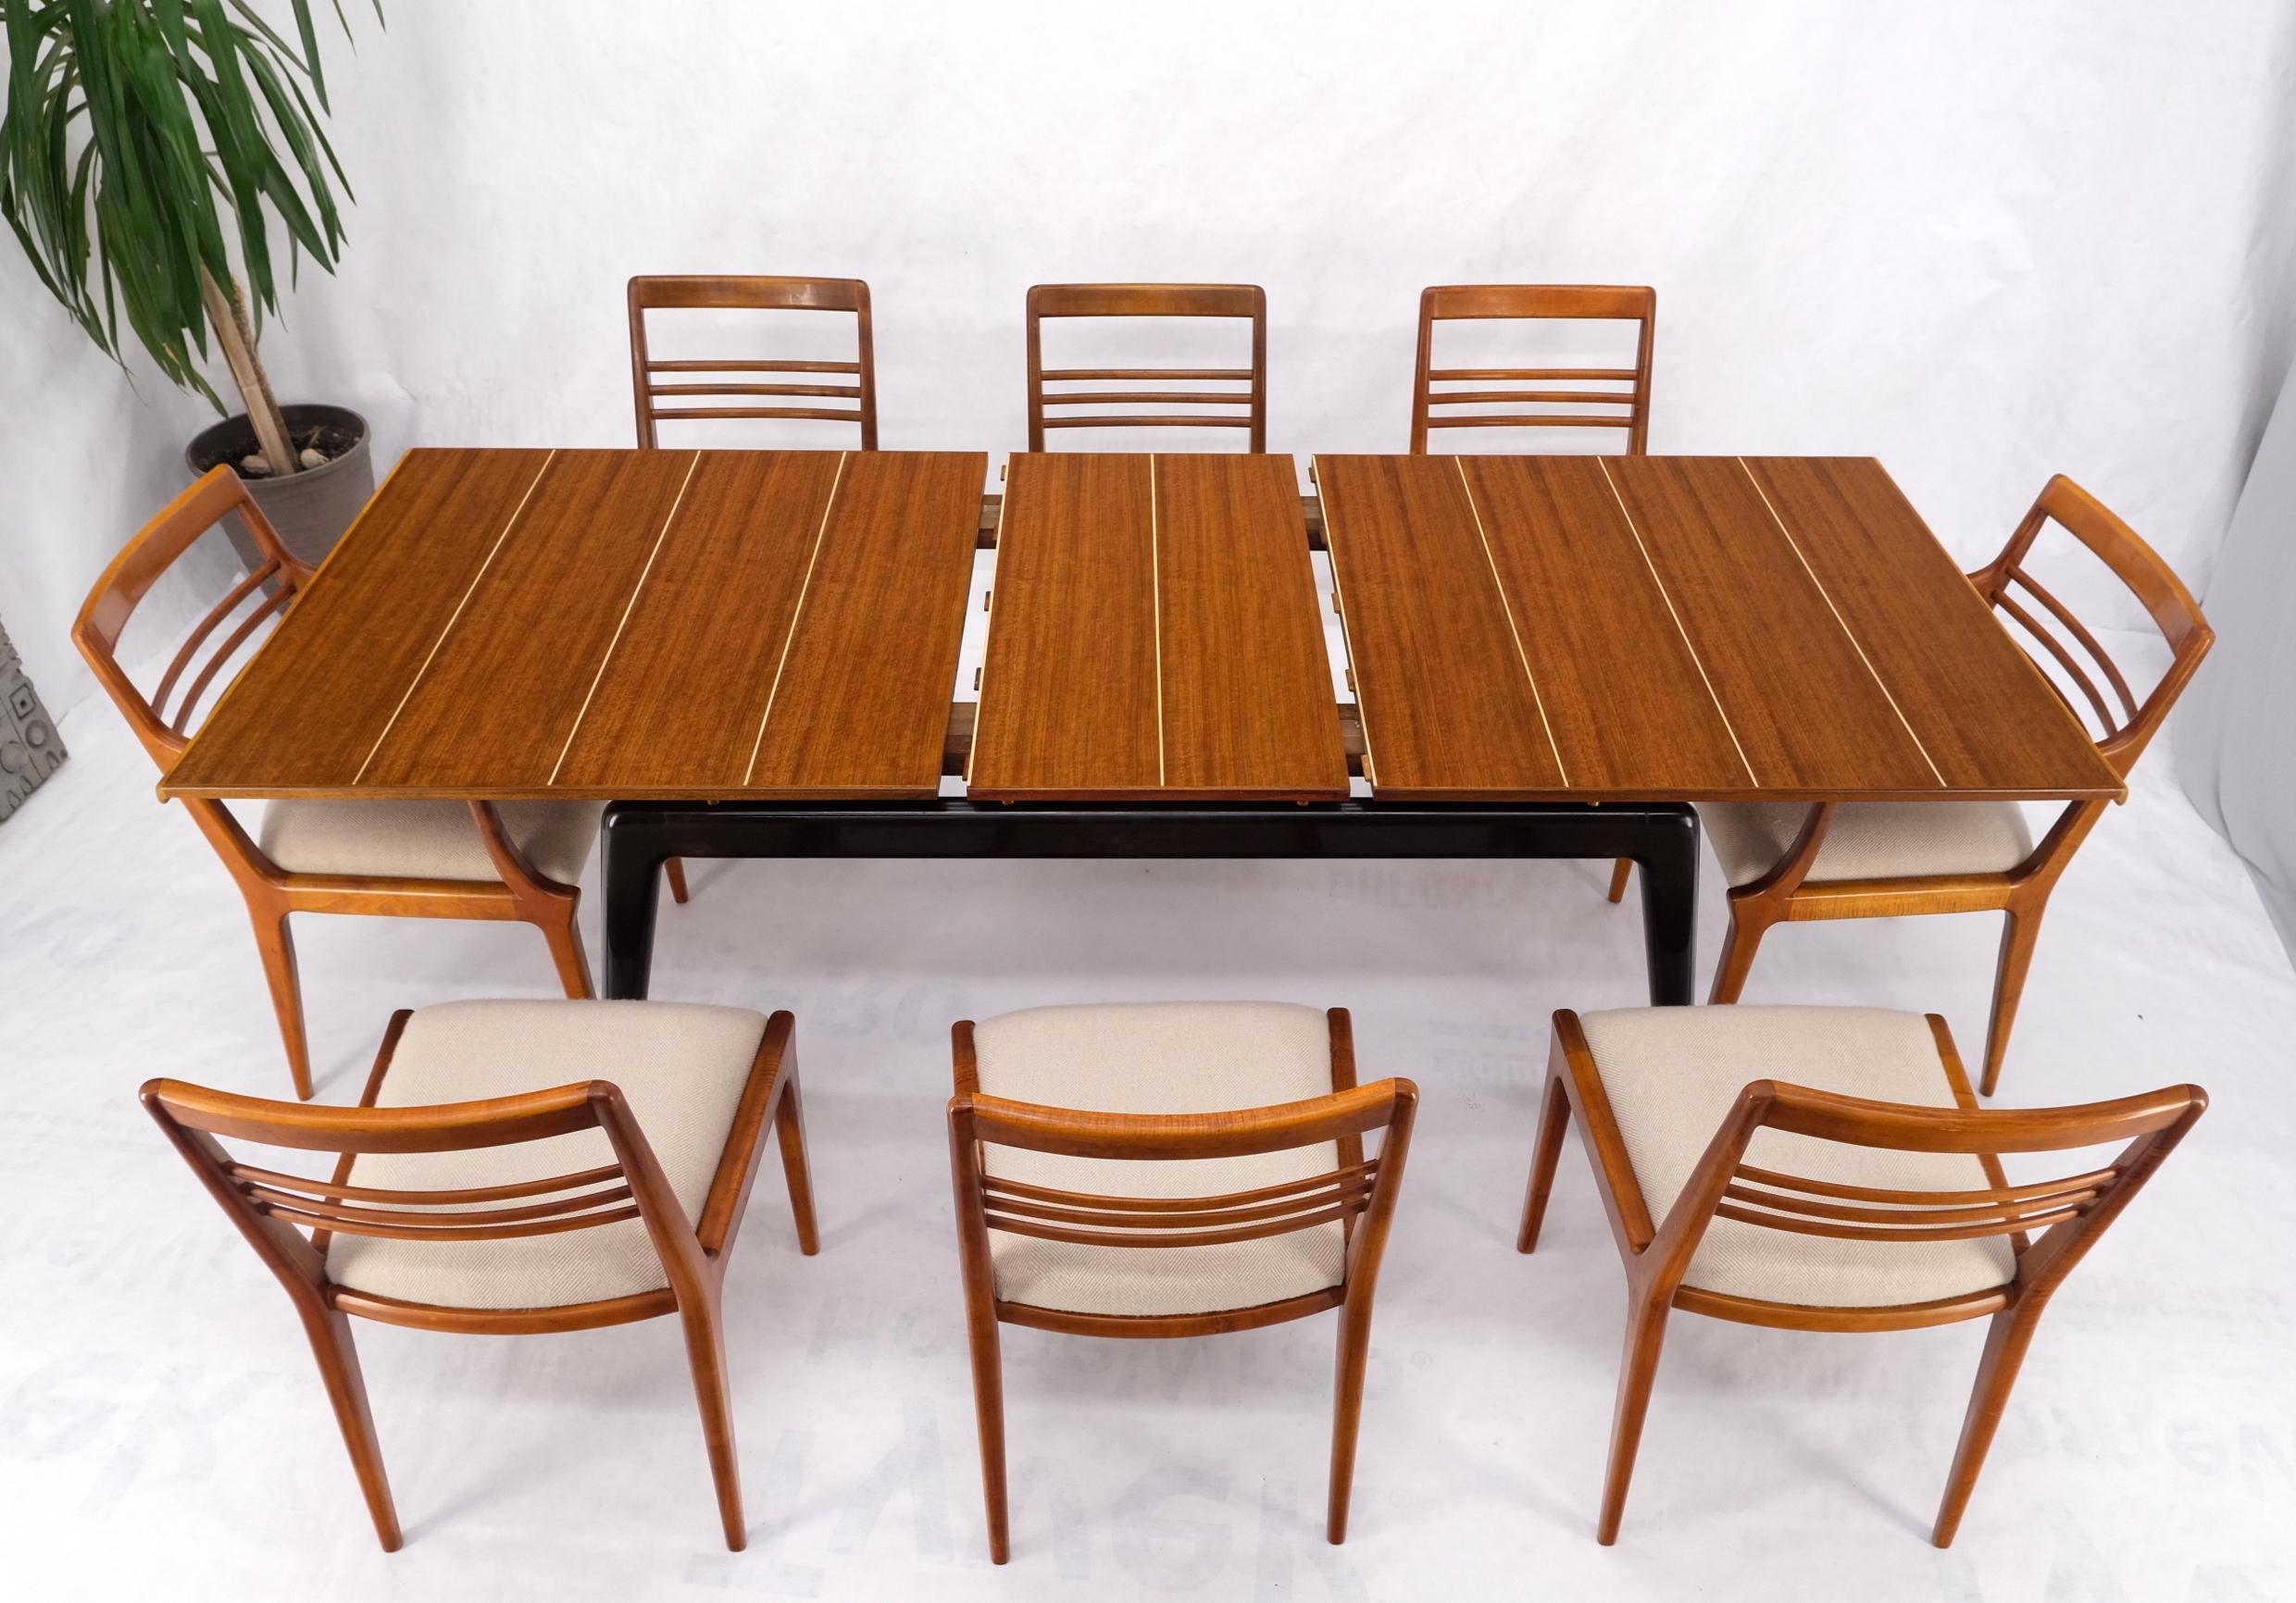 Italian Mid-Century Modern Dining Table 8 Chairs Set New Linen Upholstery Seats For Sale 8